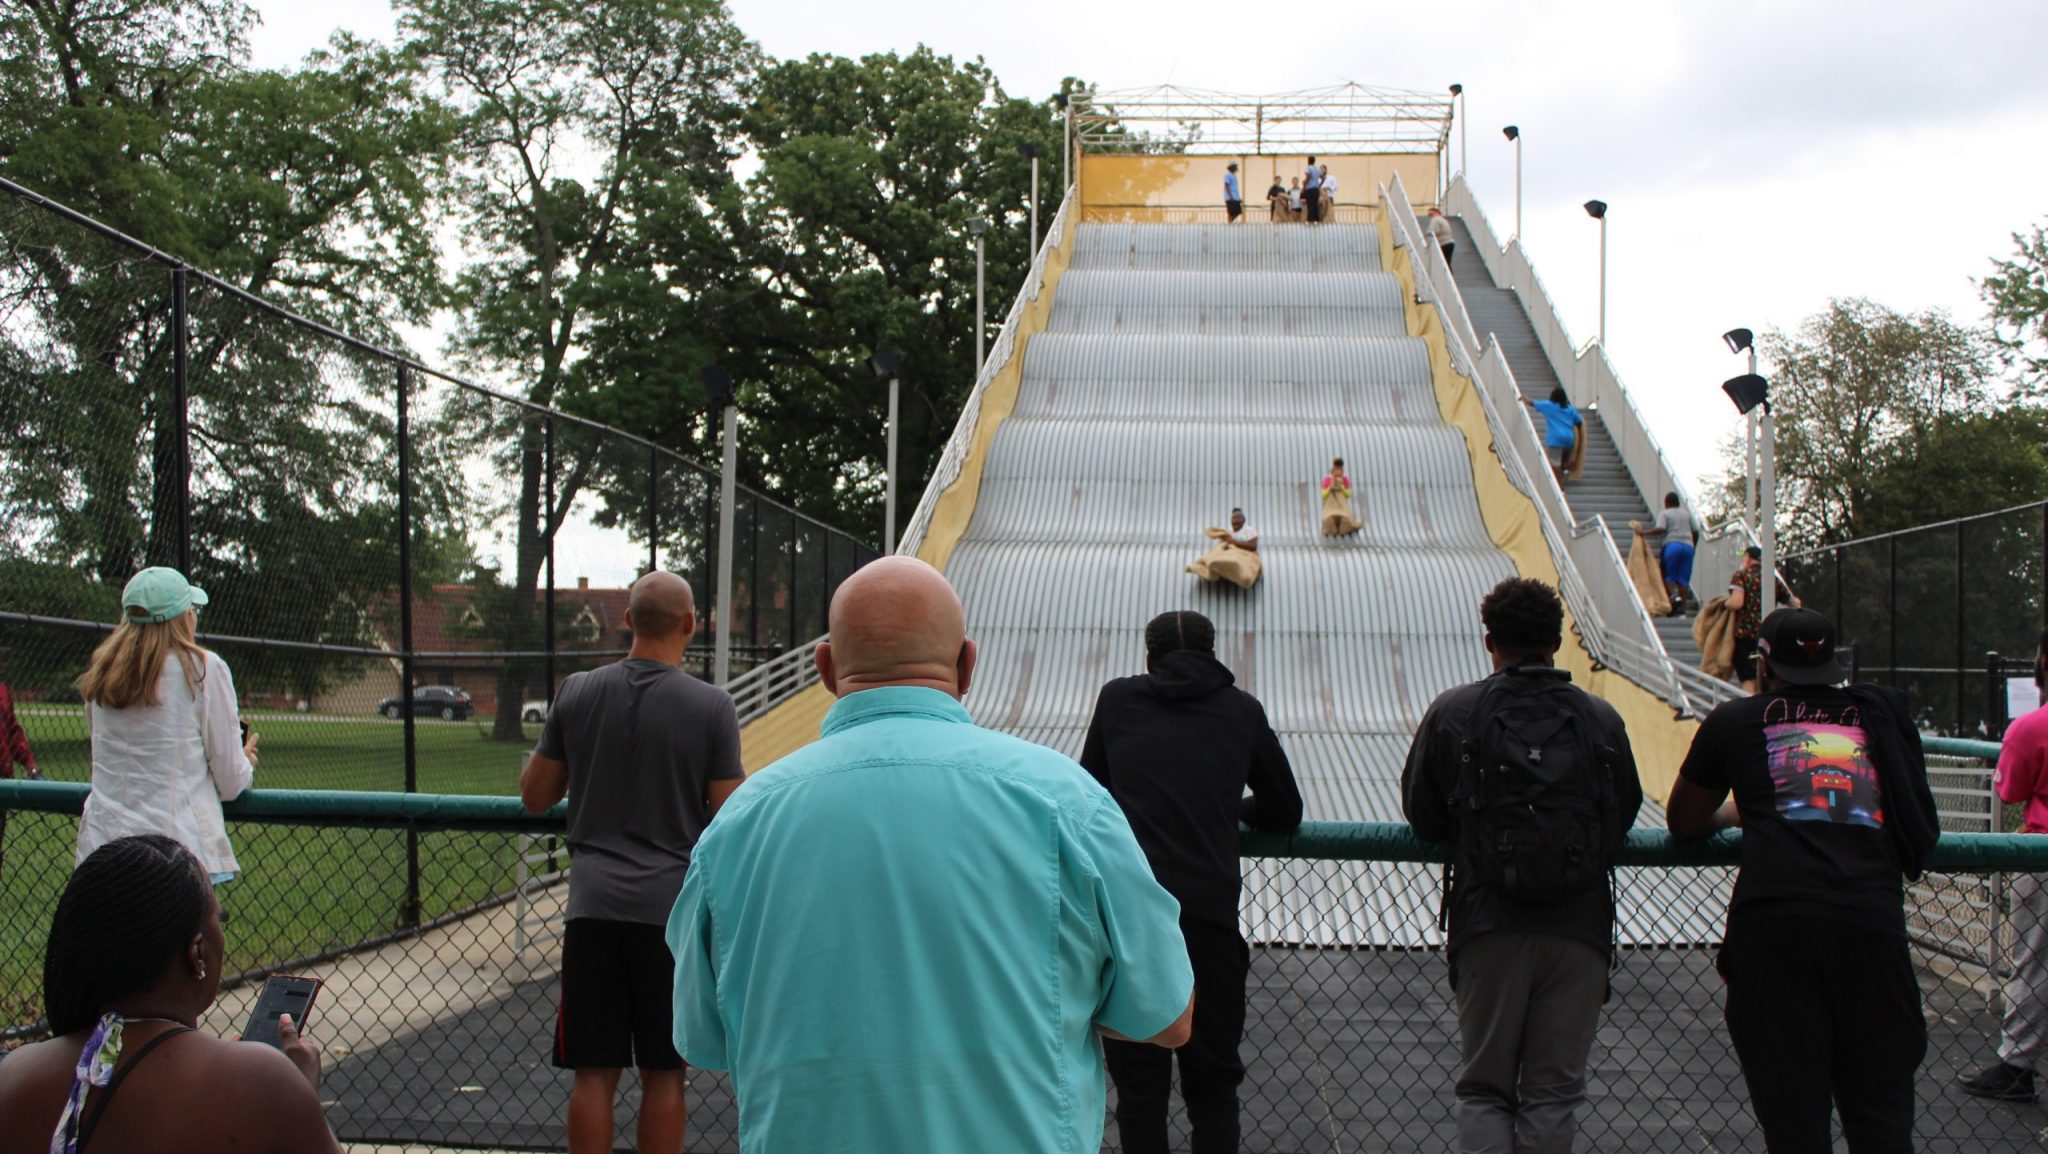 The giant slide on Belle Isle will reopen this summer after shutting down due to safety concerns.